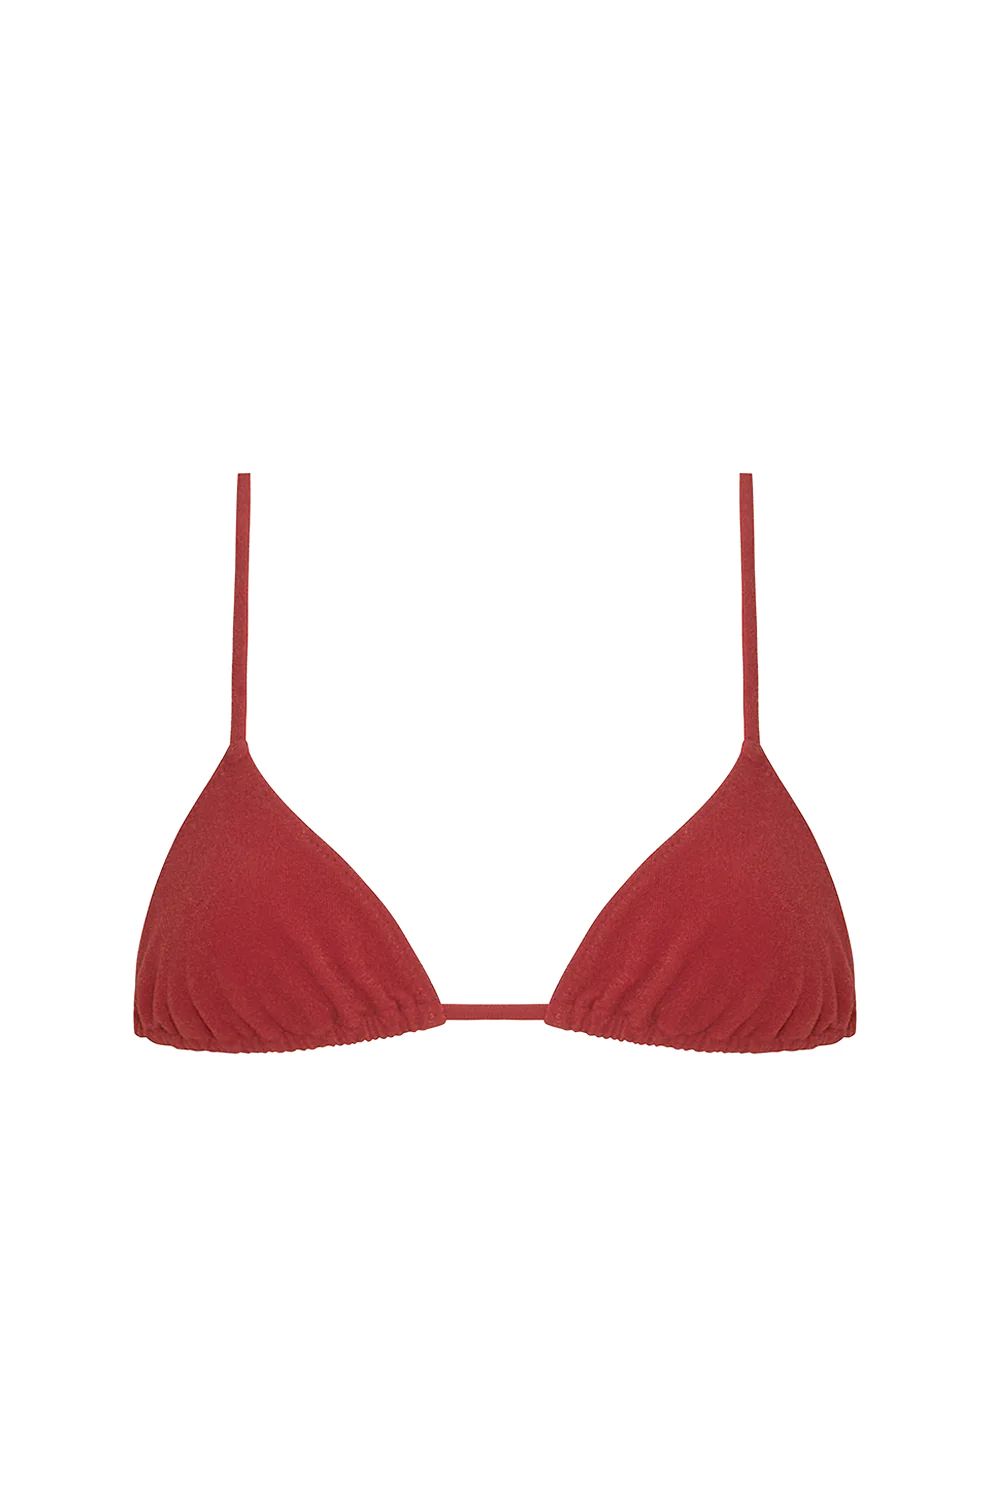 equator top in paprika eco terry | Tropic of C